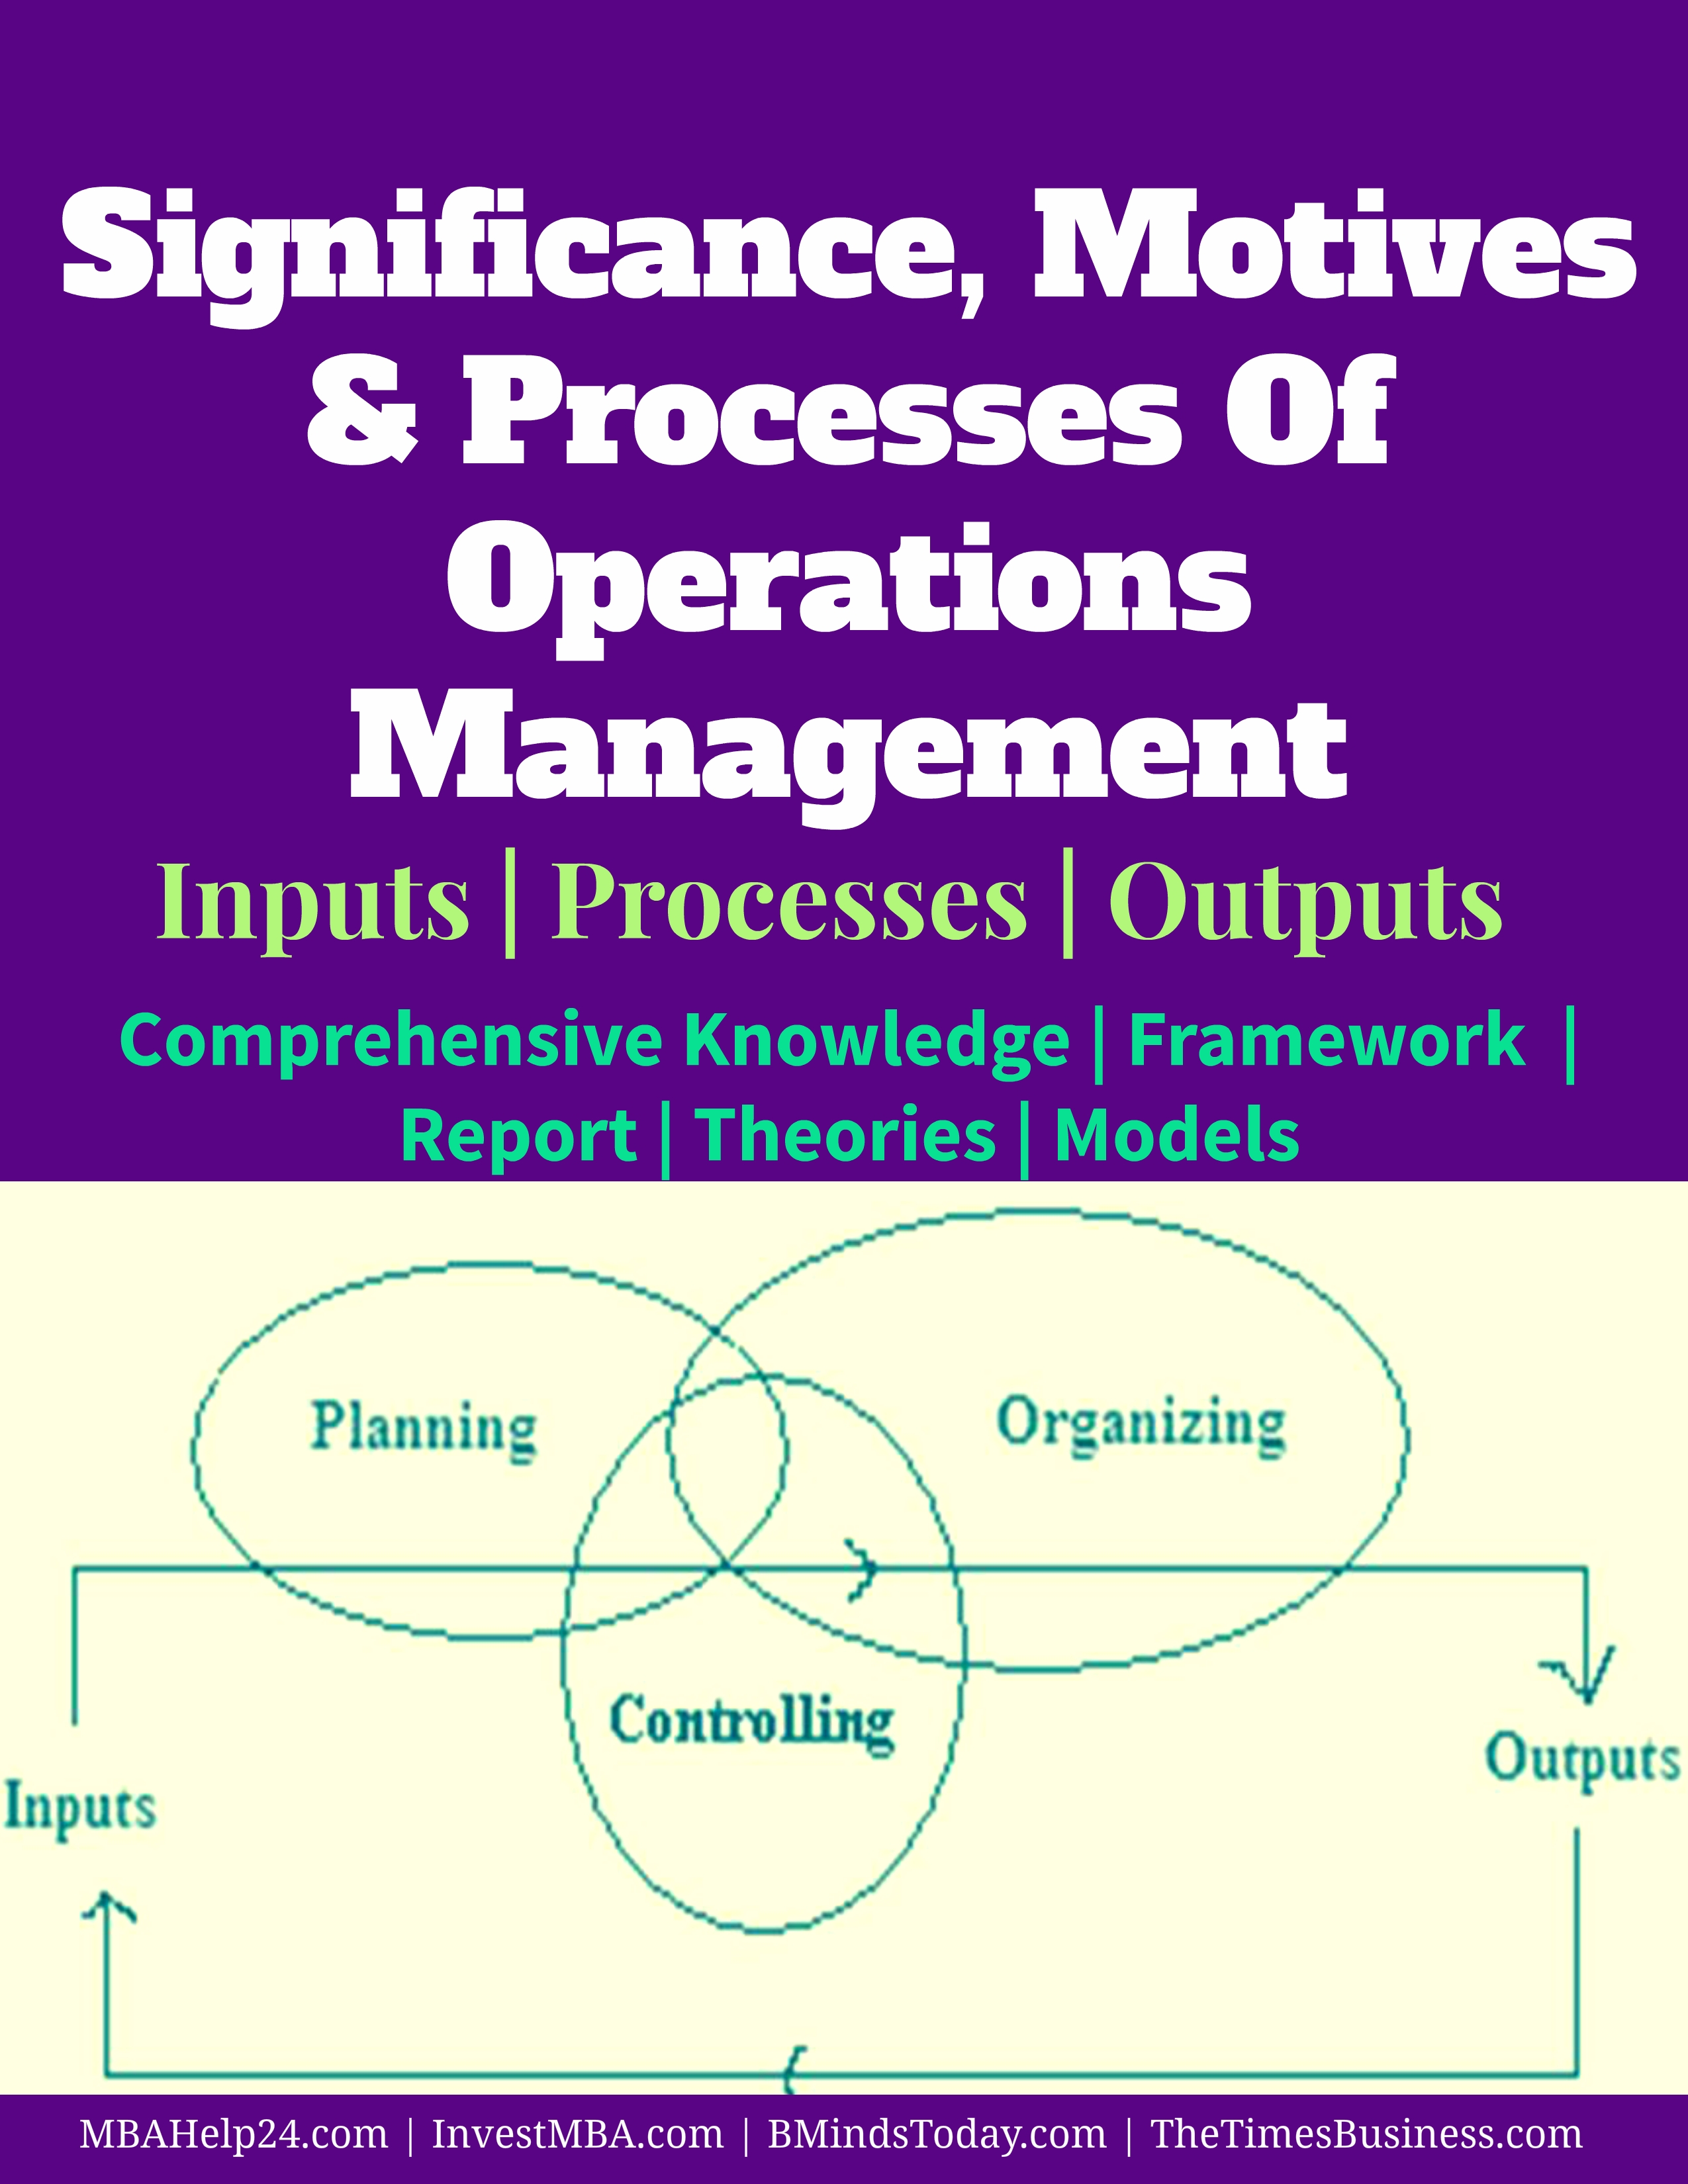 Significance, motives and processes of Operations Management operations management Processes Of Operations Management | Significance | Motives | Inputs | Outputs Significance motives and processes of Operations Management Processes Of Operations Management | Significance | Motives Processes Of Operations Management | Significance | Motives Significance motives and processes of Operations Management